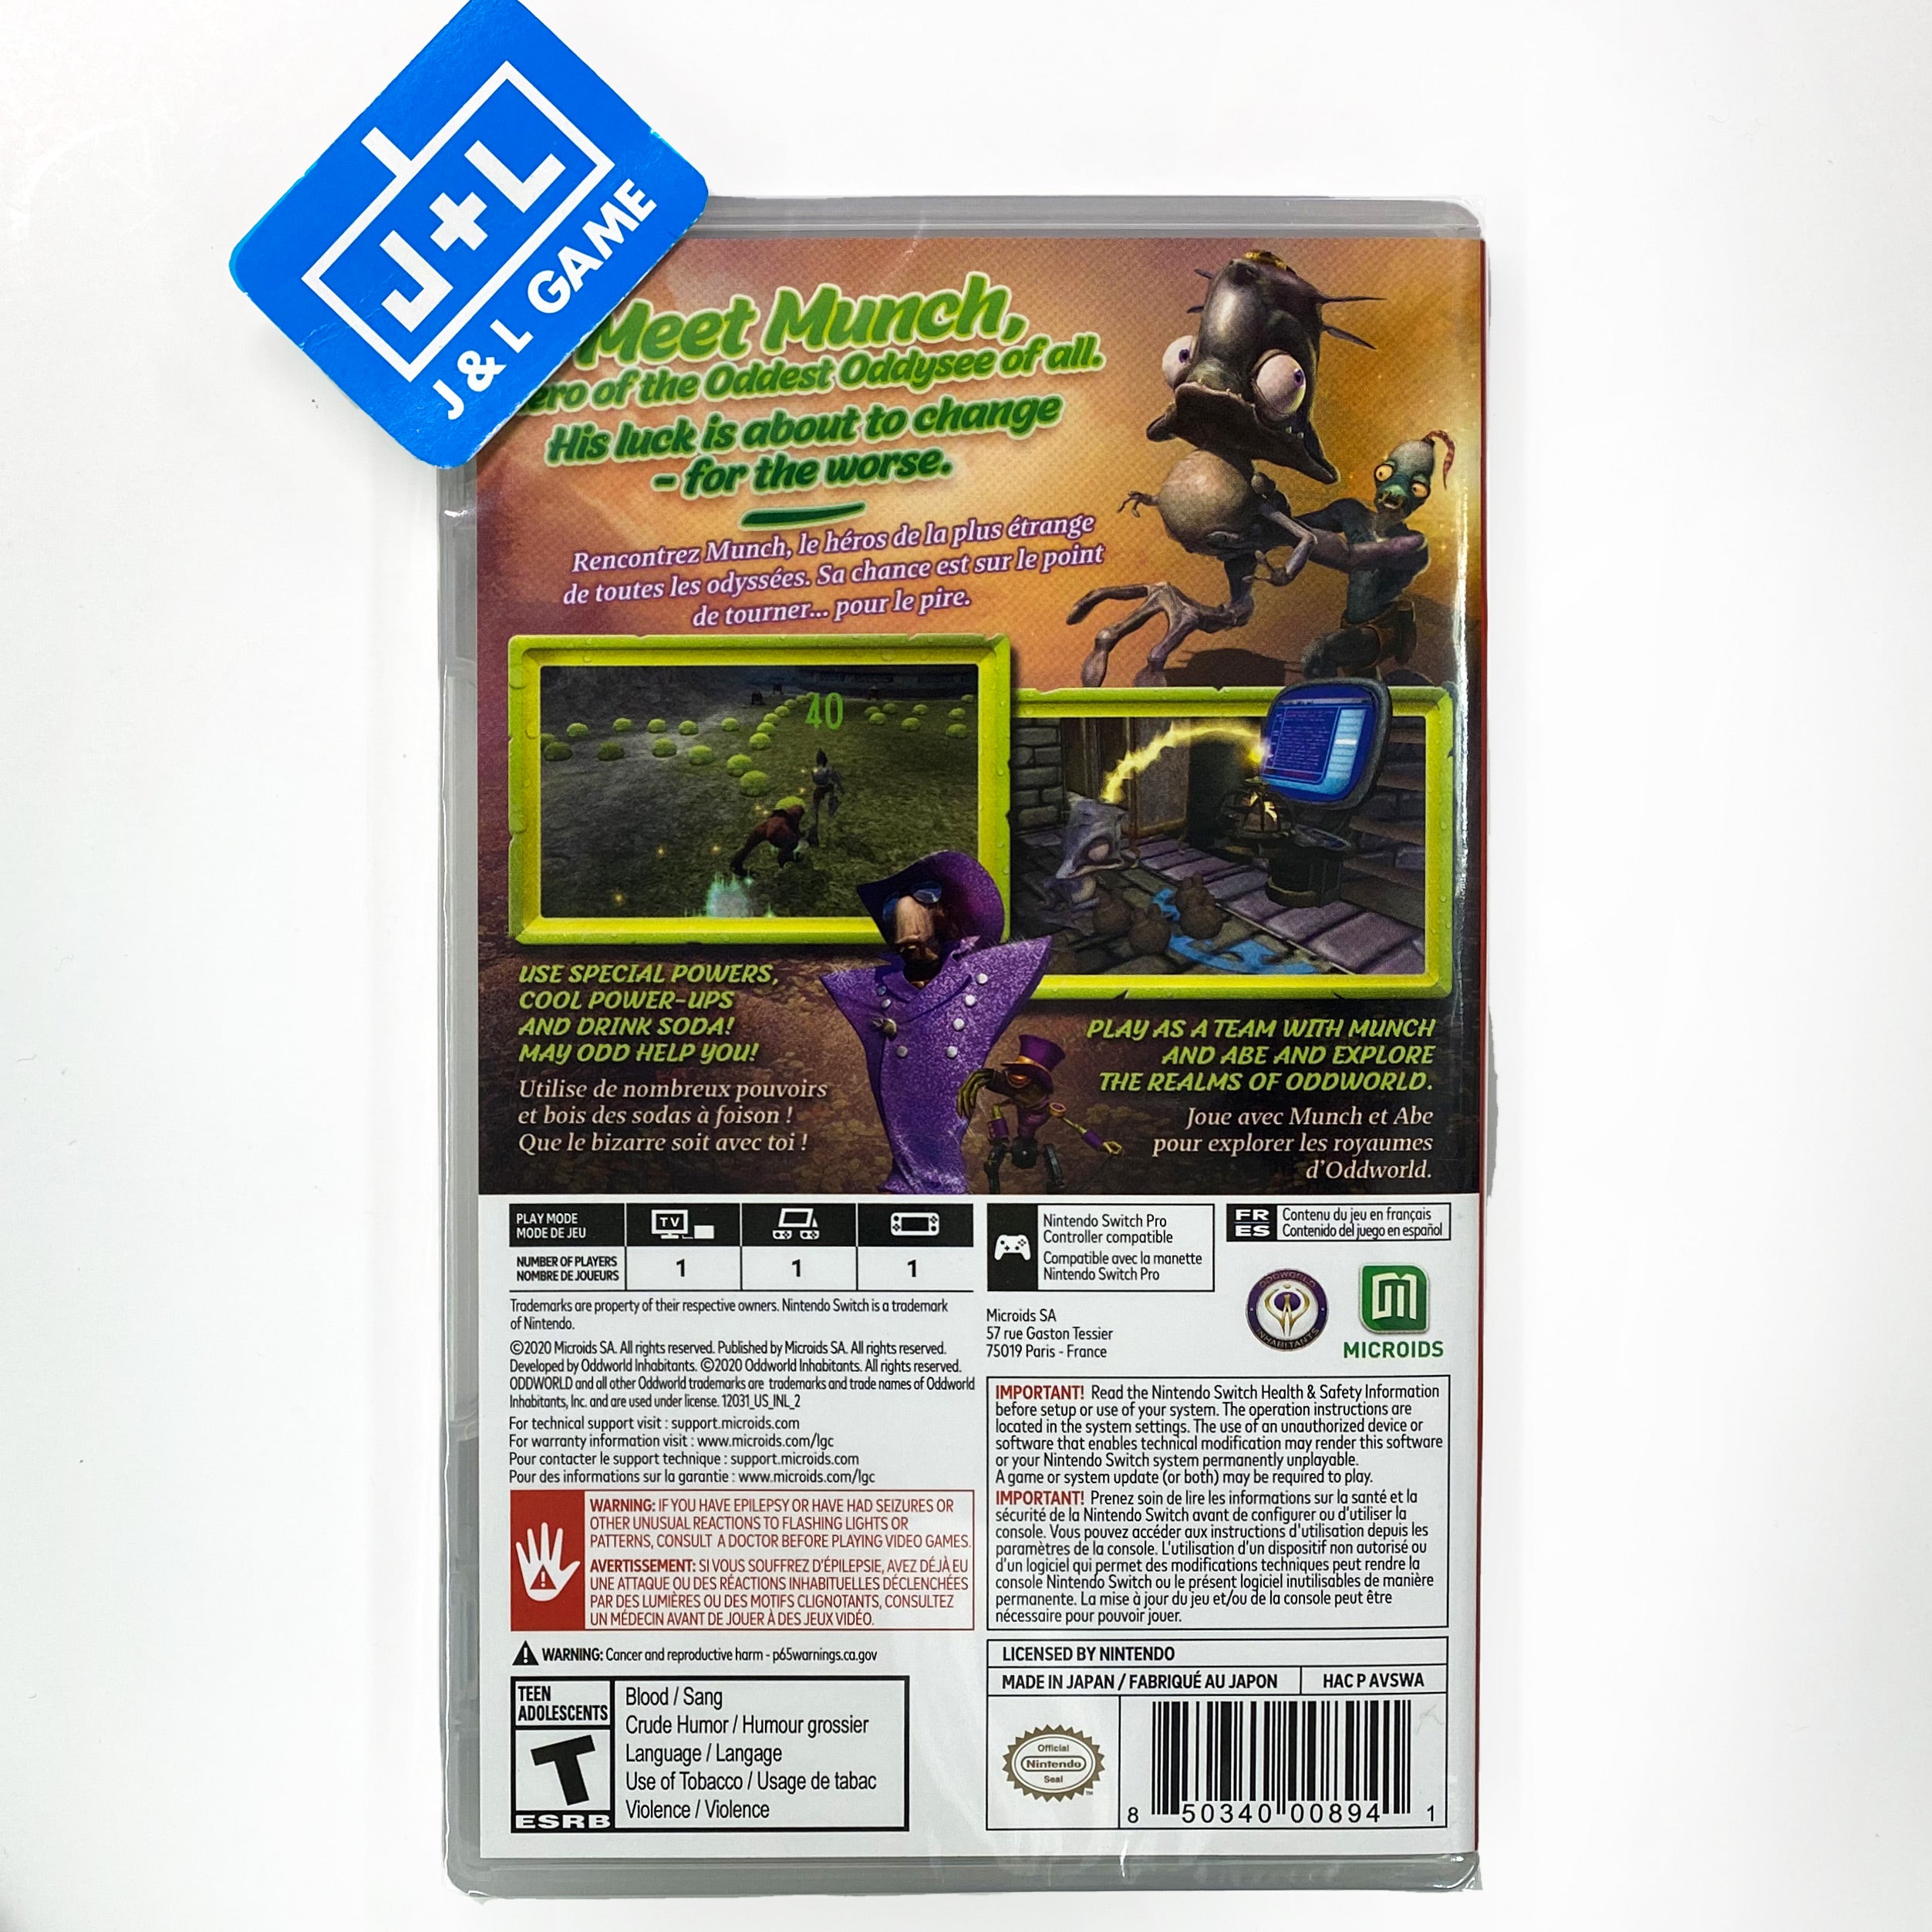 Oddworld: Munch's Oddysee - (NSW) Nintendo Switch Video Games Microids   